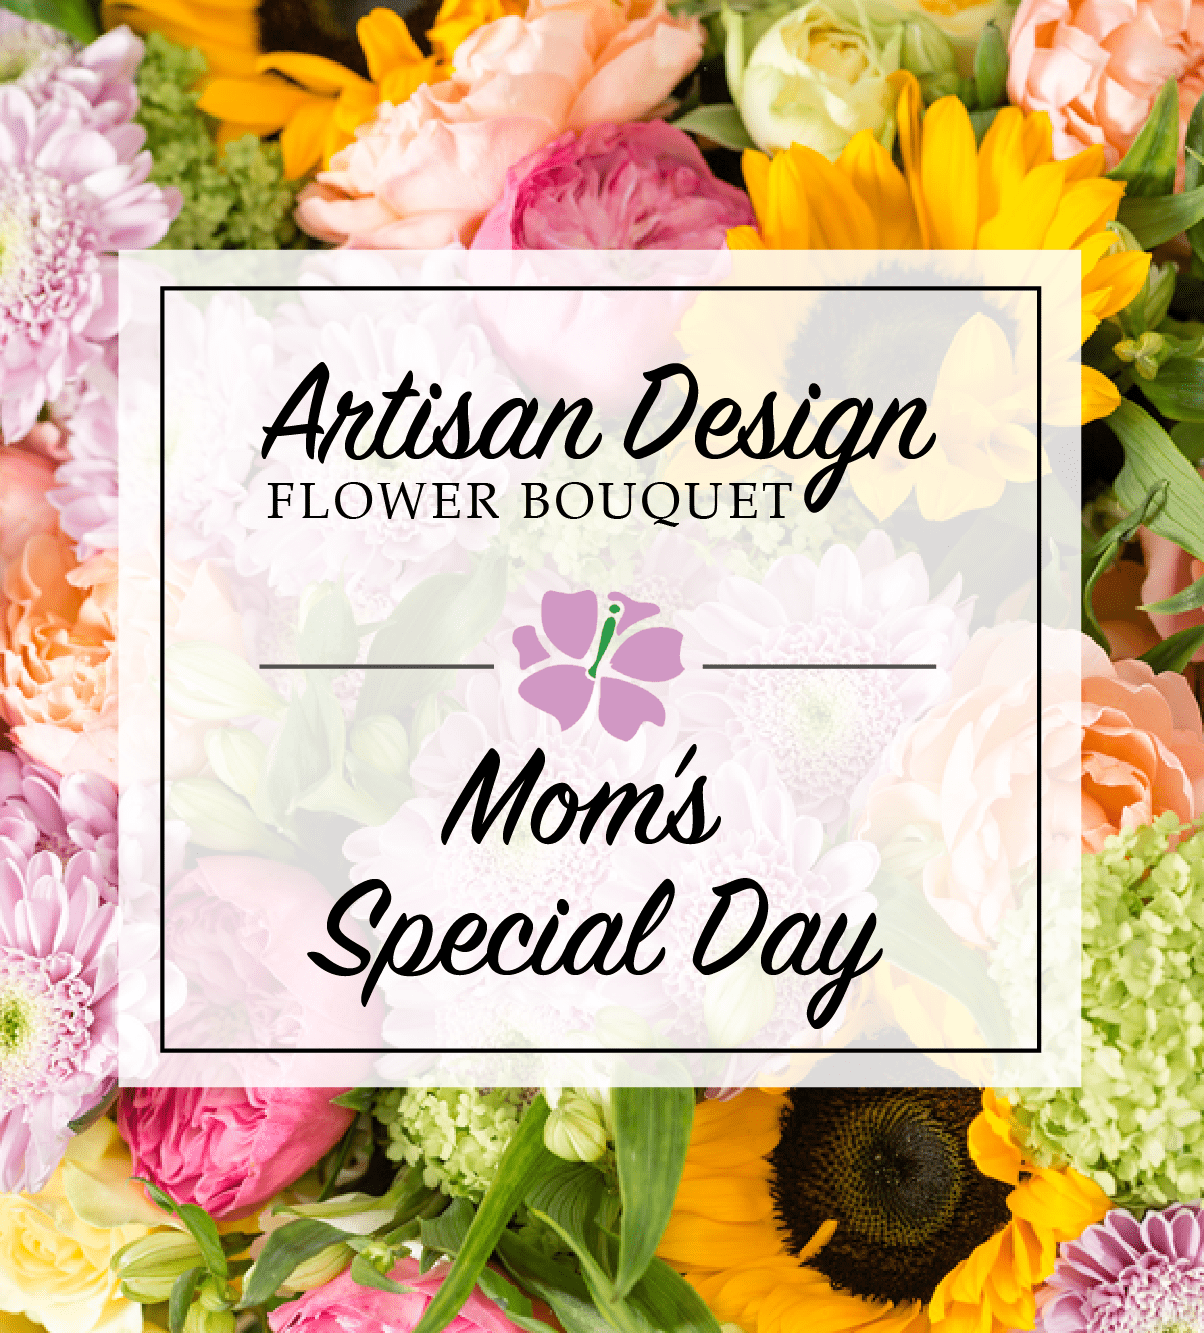 Artist's Design: Mom's Special Day